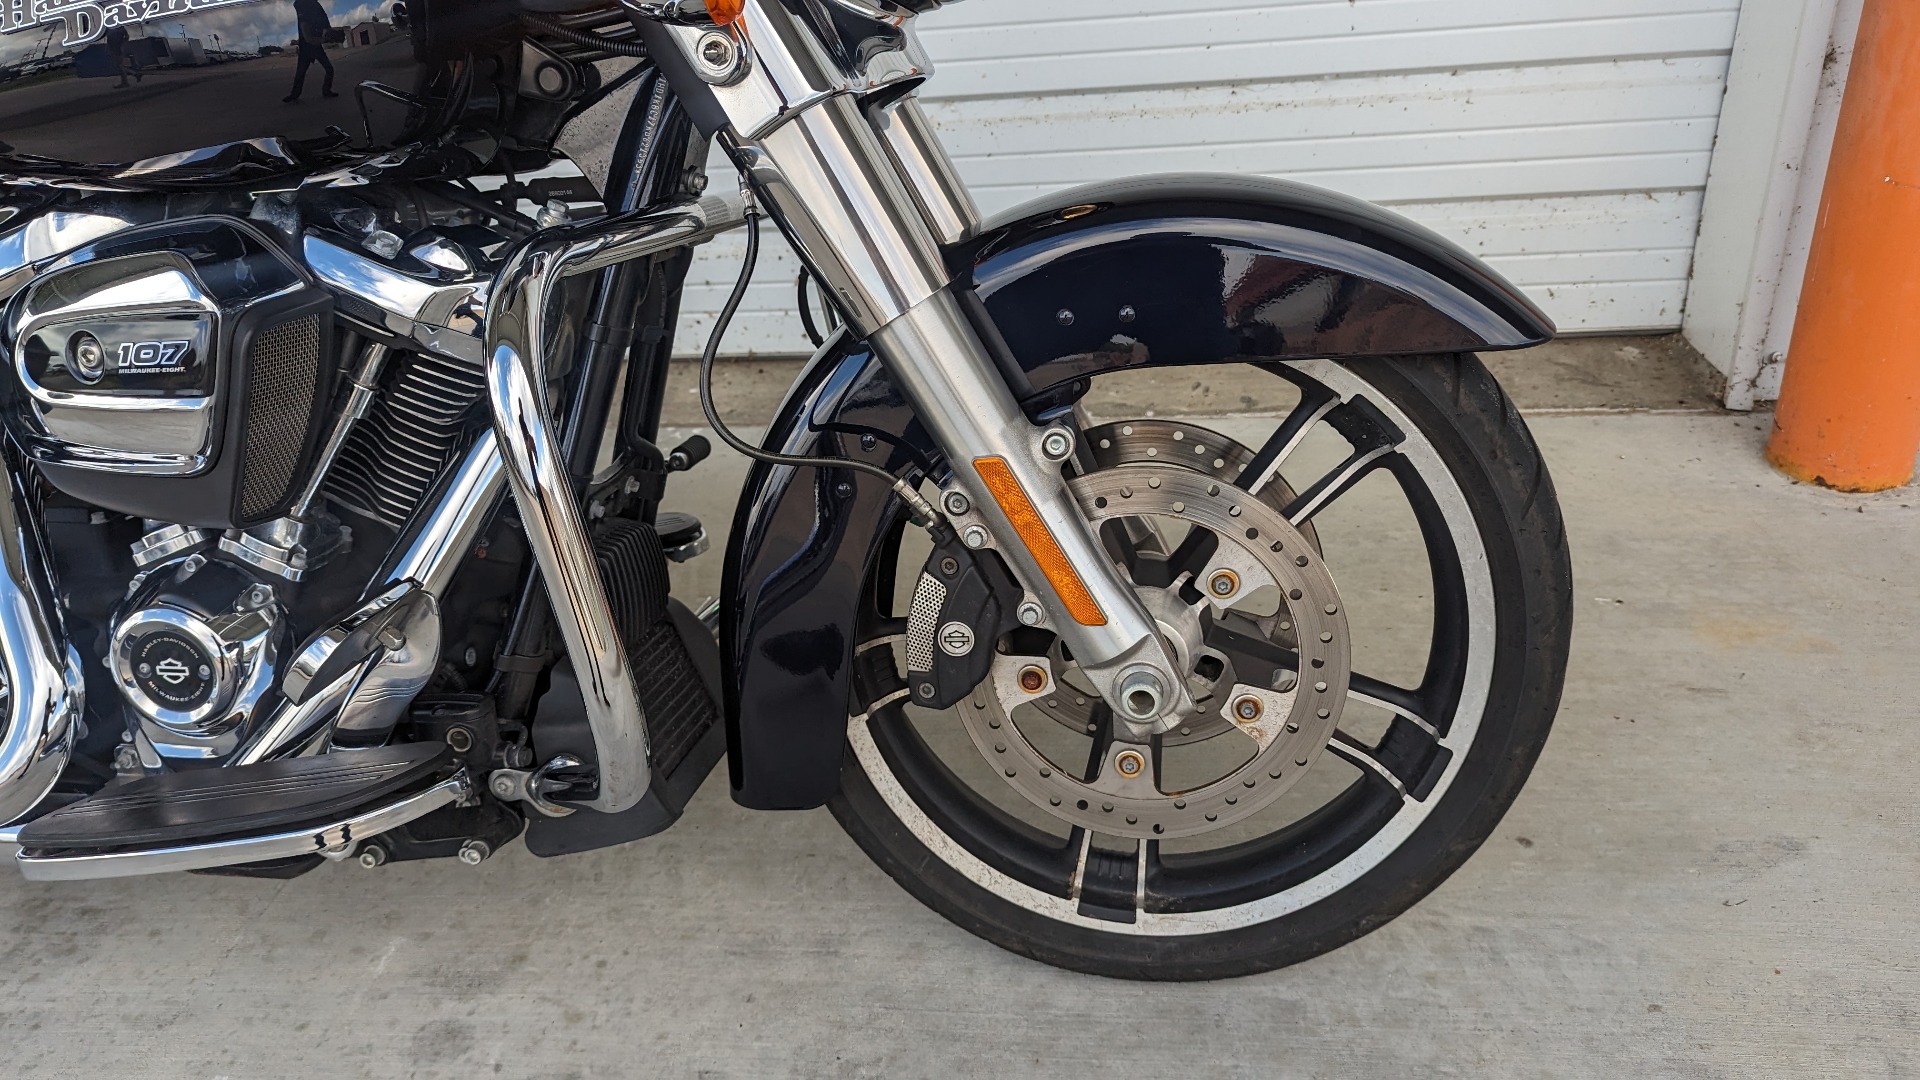 2019 harley davidson street glide for sale in texas - Photo 3